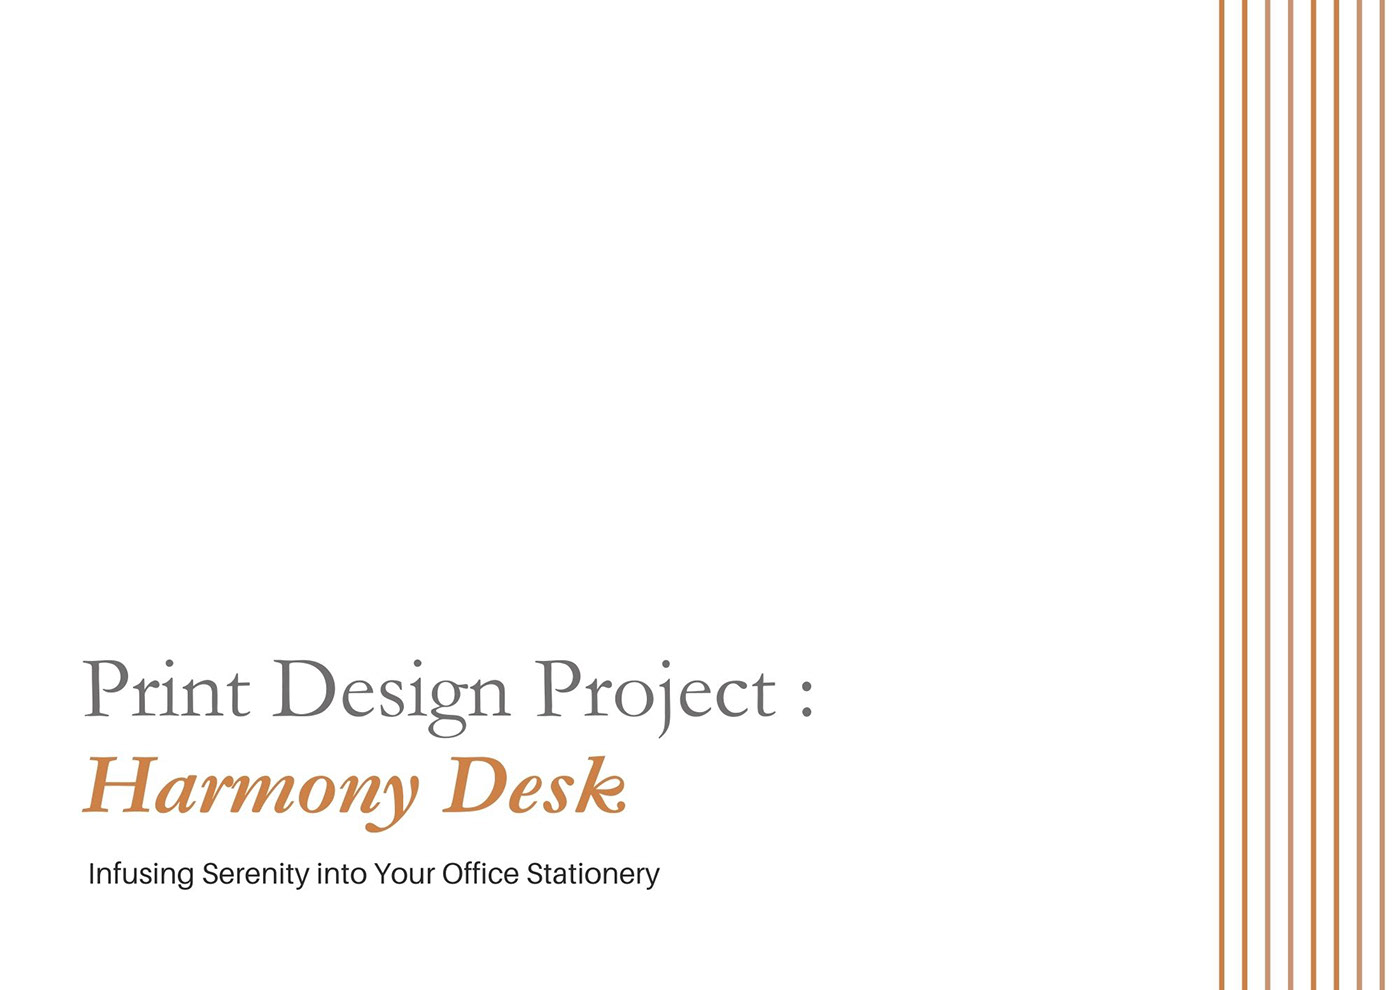 print design  textile design  collections new Office stationery design